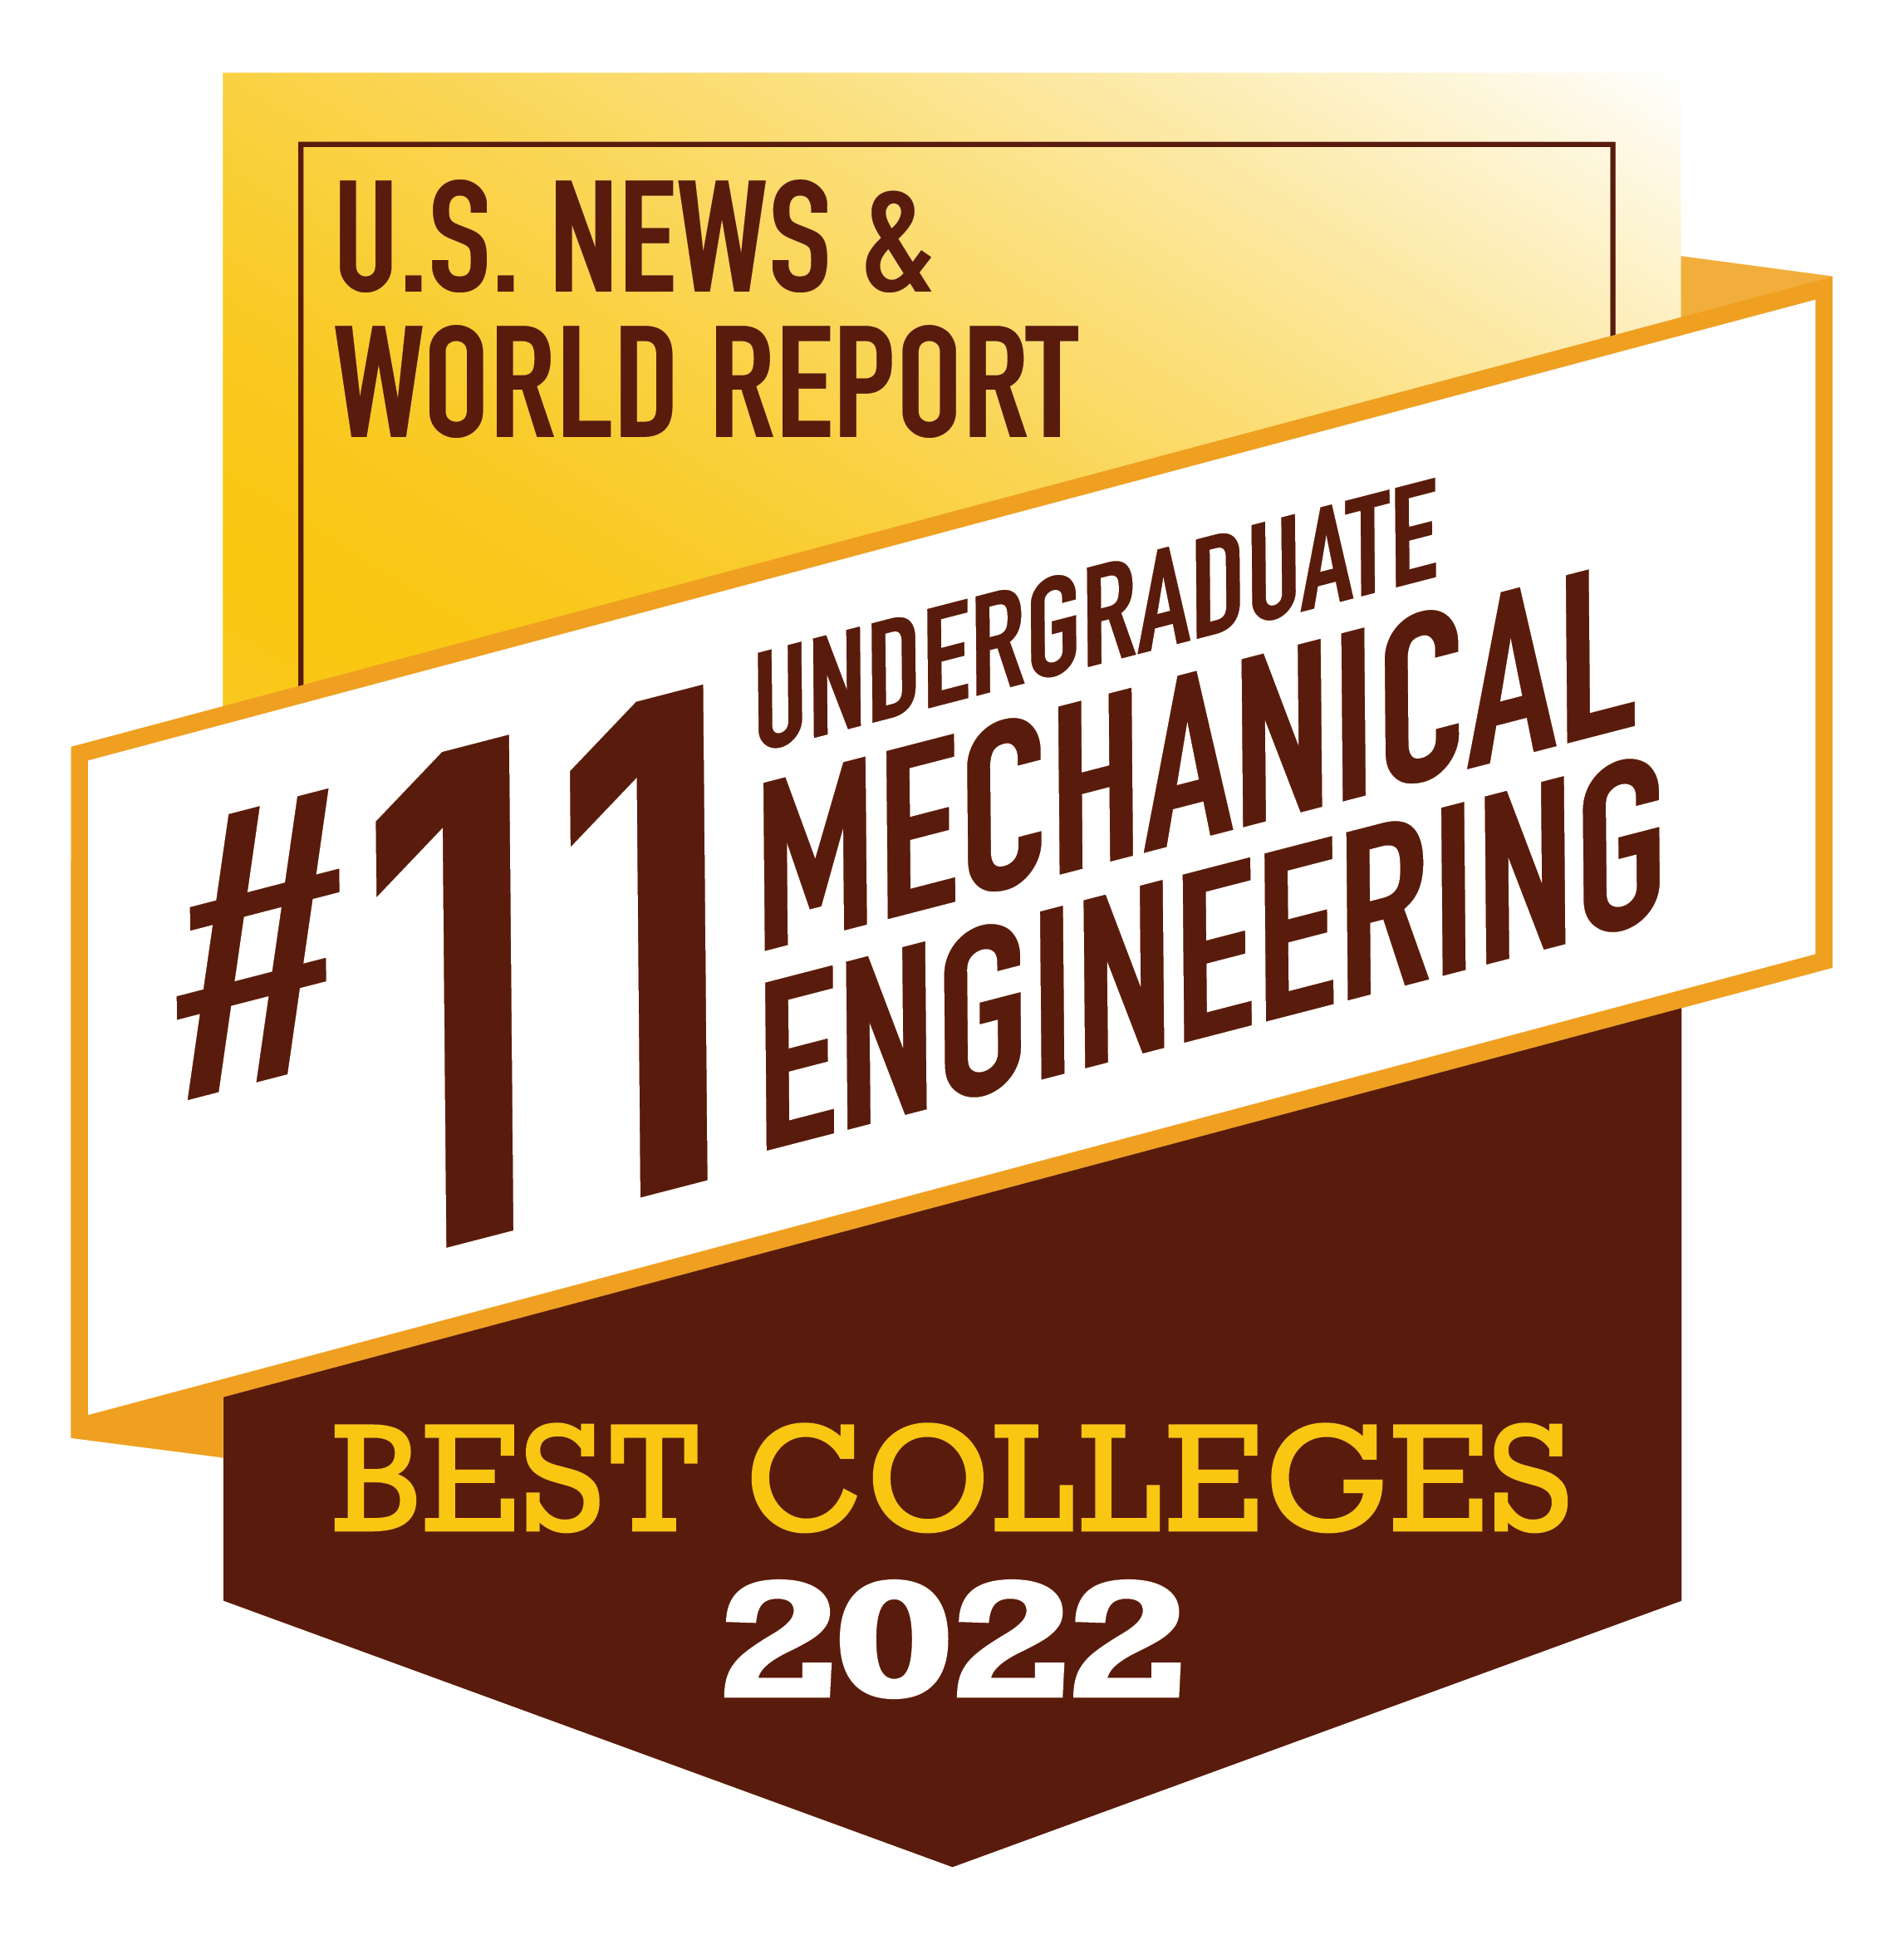 Mechanical Engineering named 11th best by U.S. News & World Report